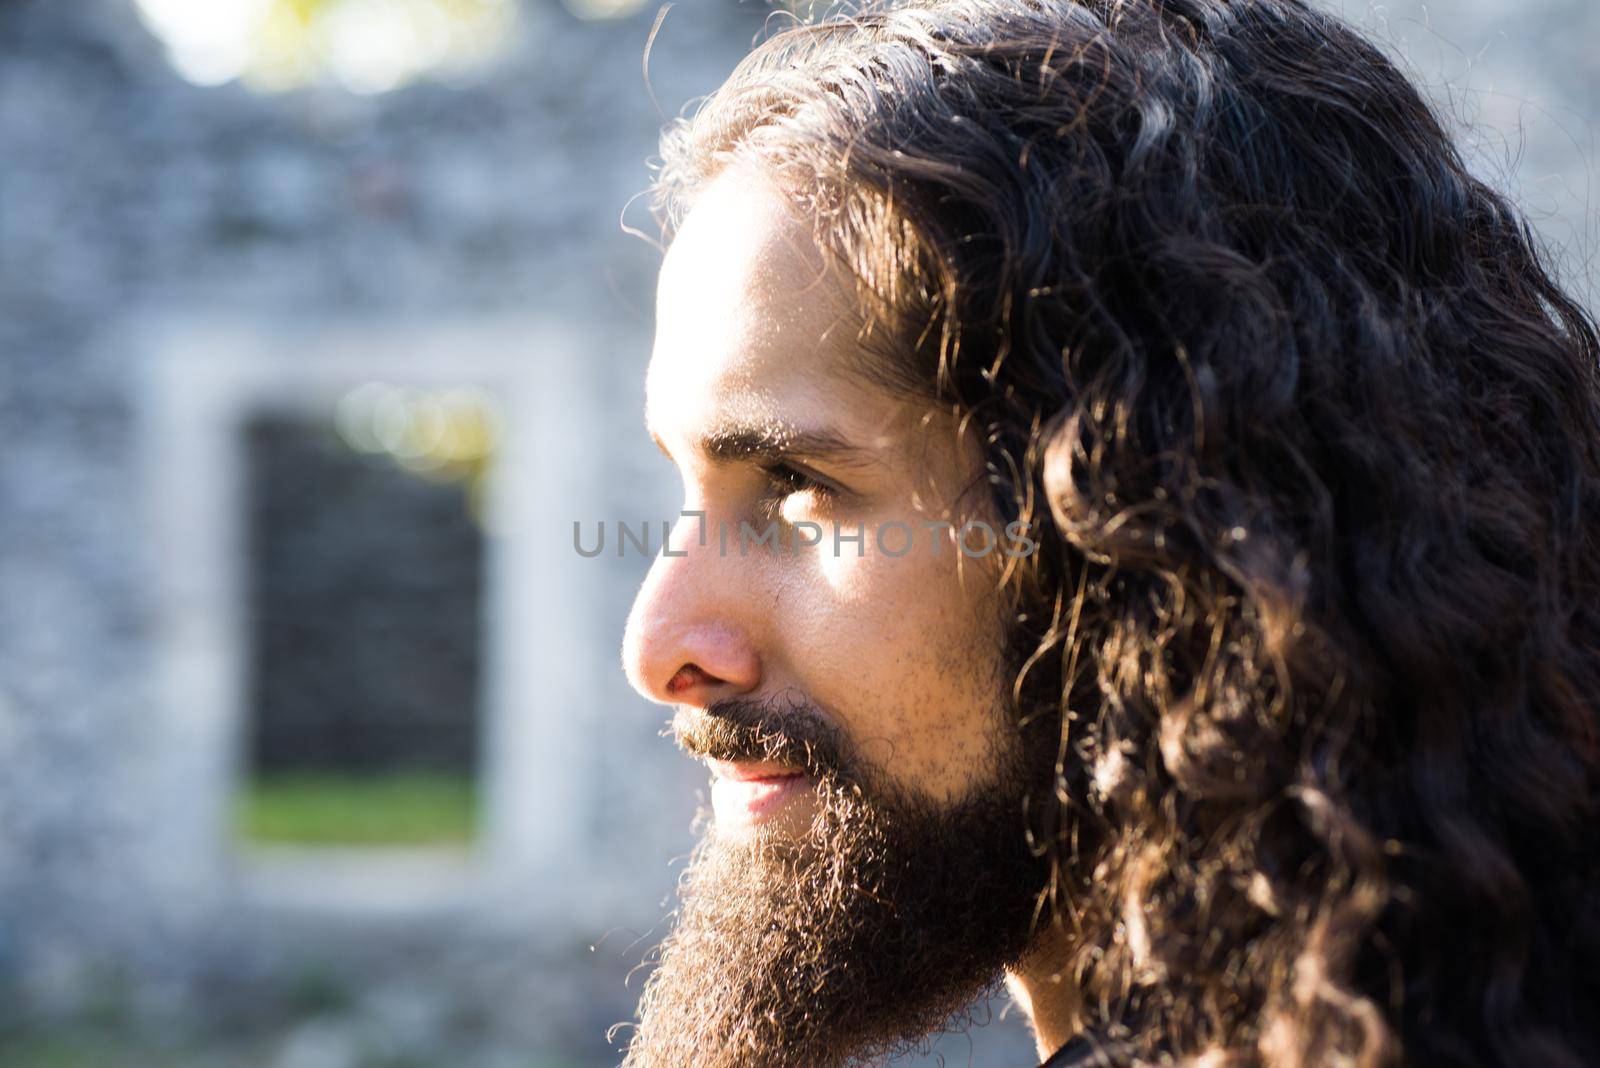 Confident man with unusual appearance stare straight before one. Man style and fashion concept. Close up portrait of handsome man with long dark wavy hair and beard